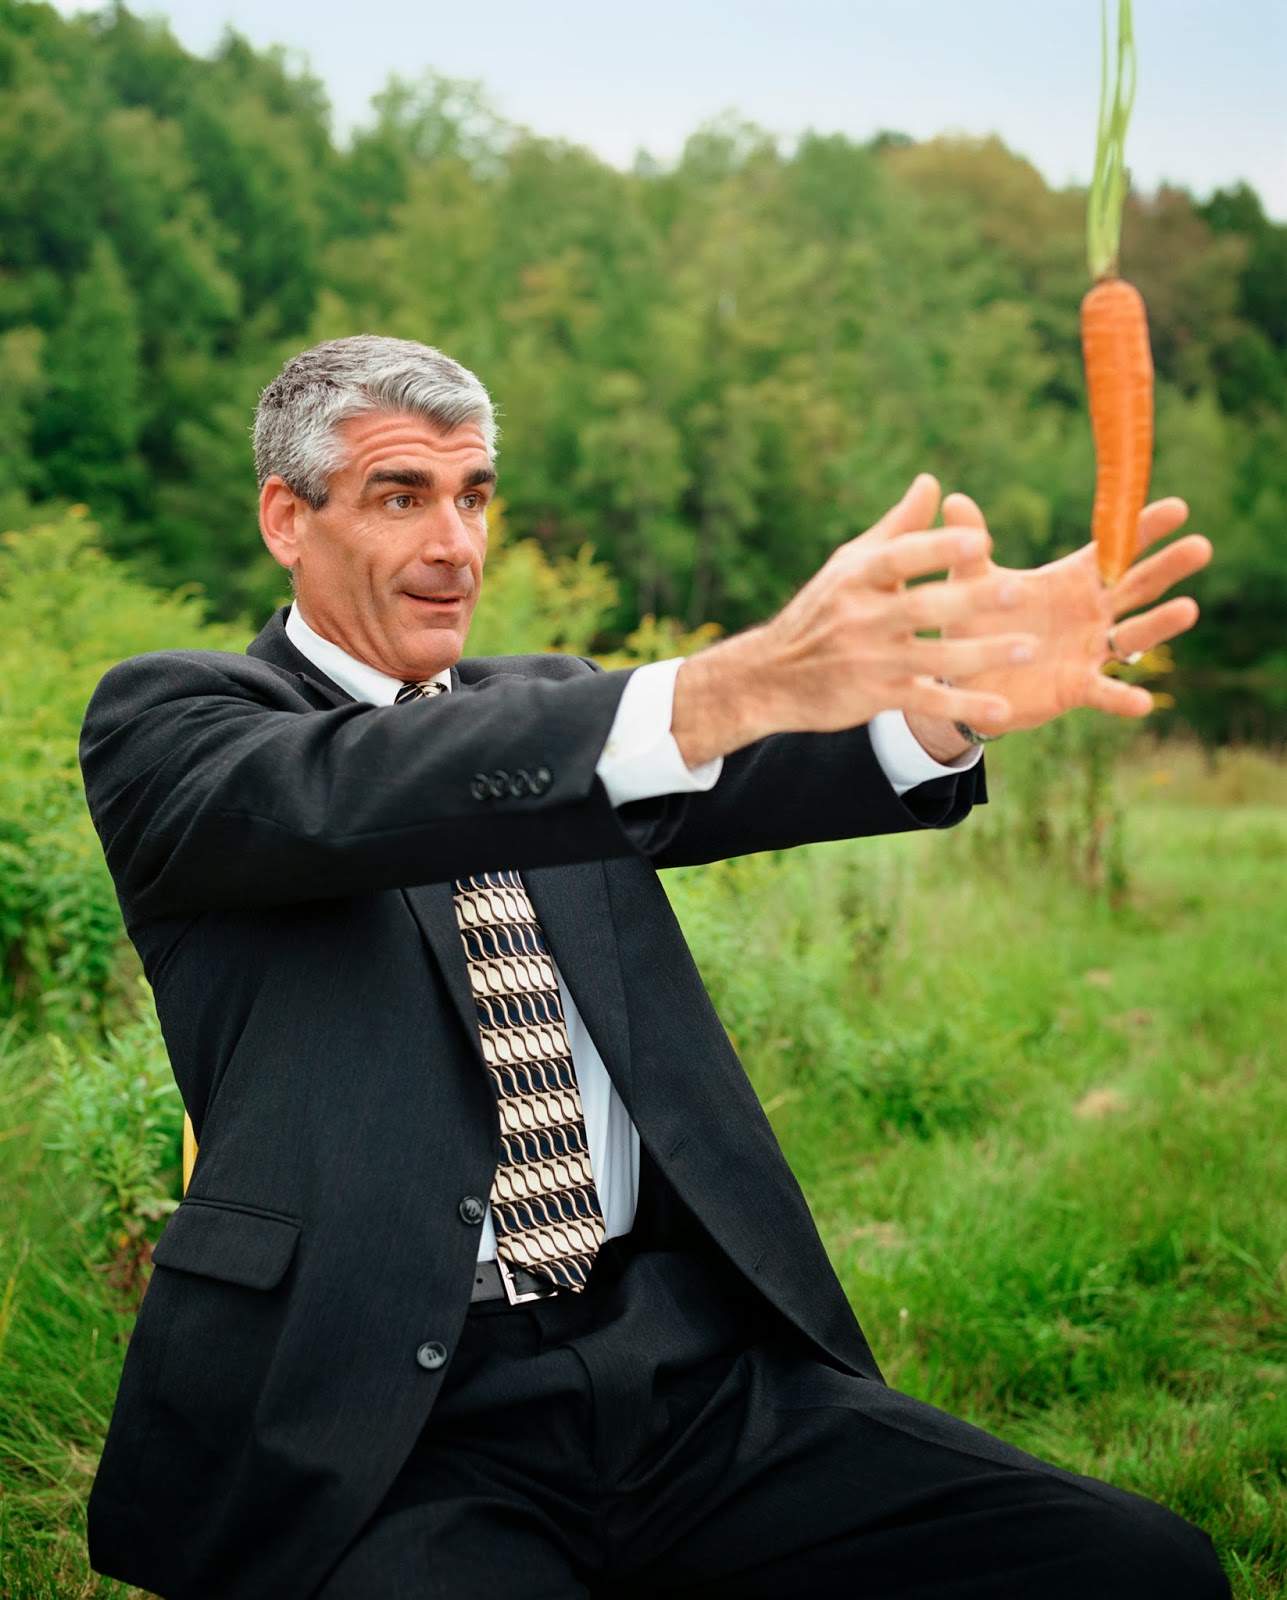 man in business suit reaching for carrot